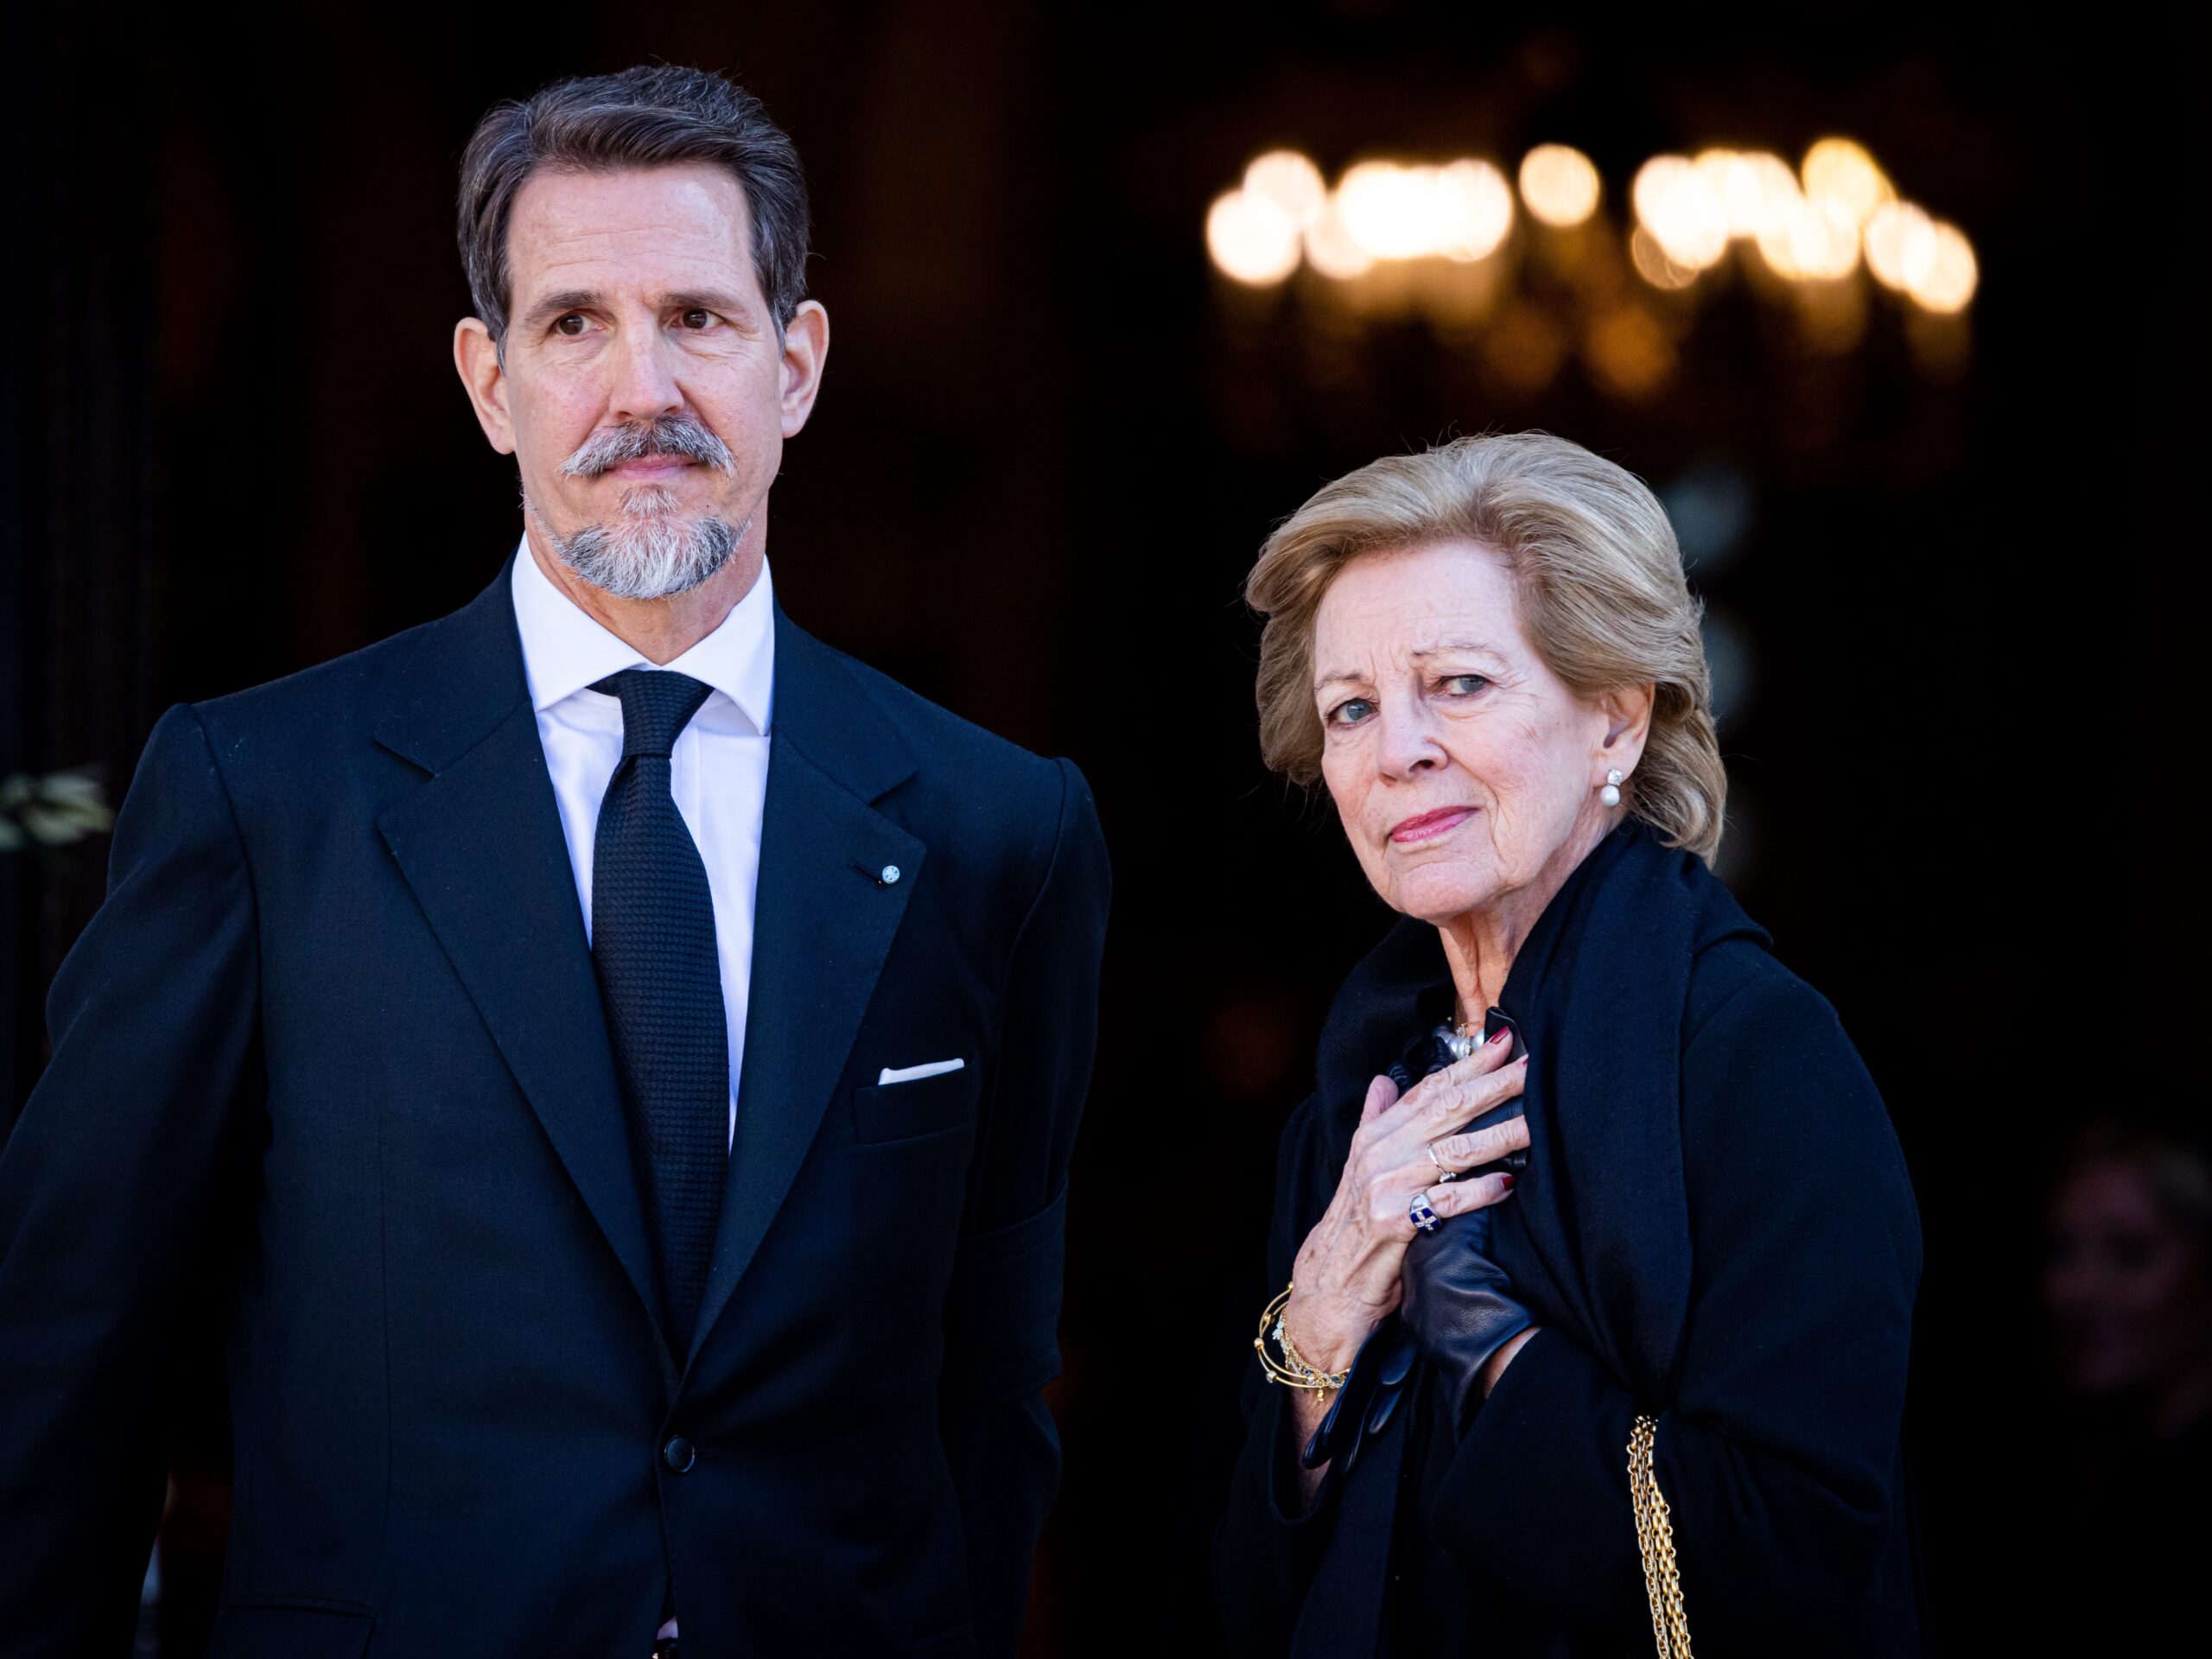 Queen Anne Marie of Greece and Crown Prince Pavlos of Greece attend the funeral of Former King Constantine II of Greece on January 16, 2023 in Athens, Greece.